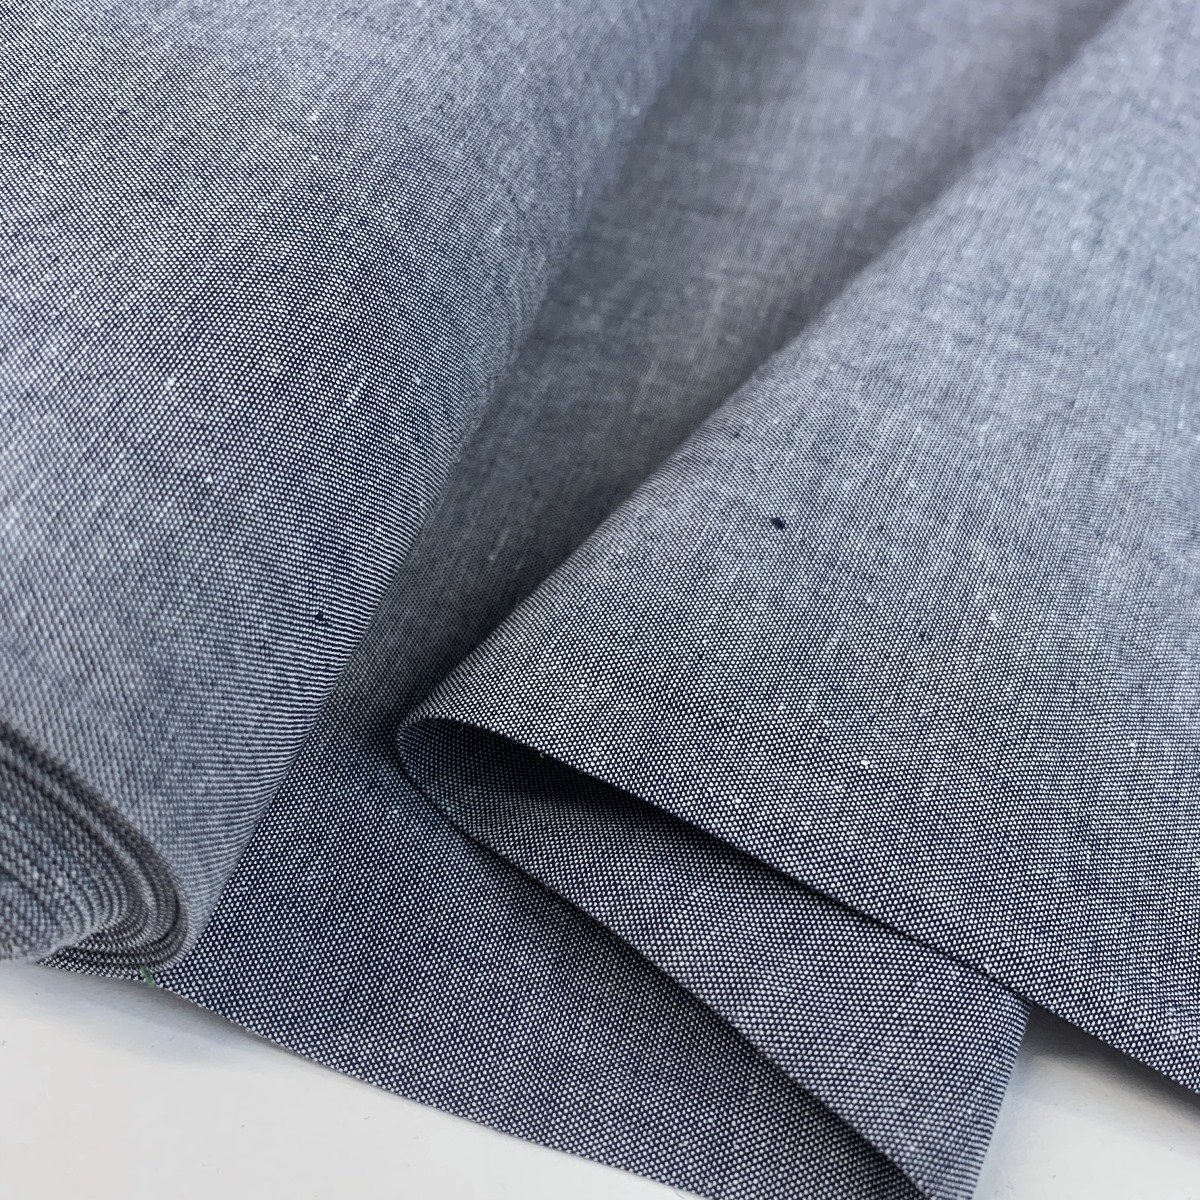 https://www.croftmill.co.uk/images/pictures/2-2021/08-august-2021-2/finest-chambray-navy-cotton-fabric-fold.jpg?v=71fc1295